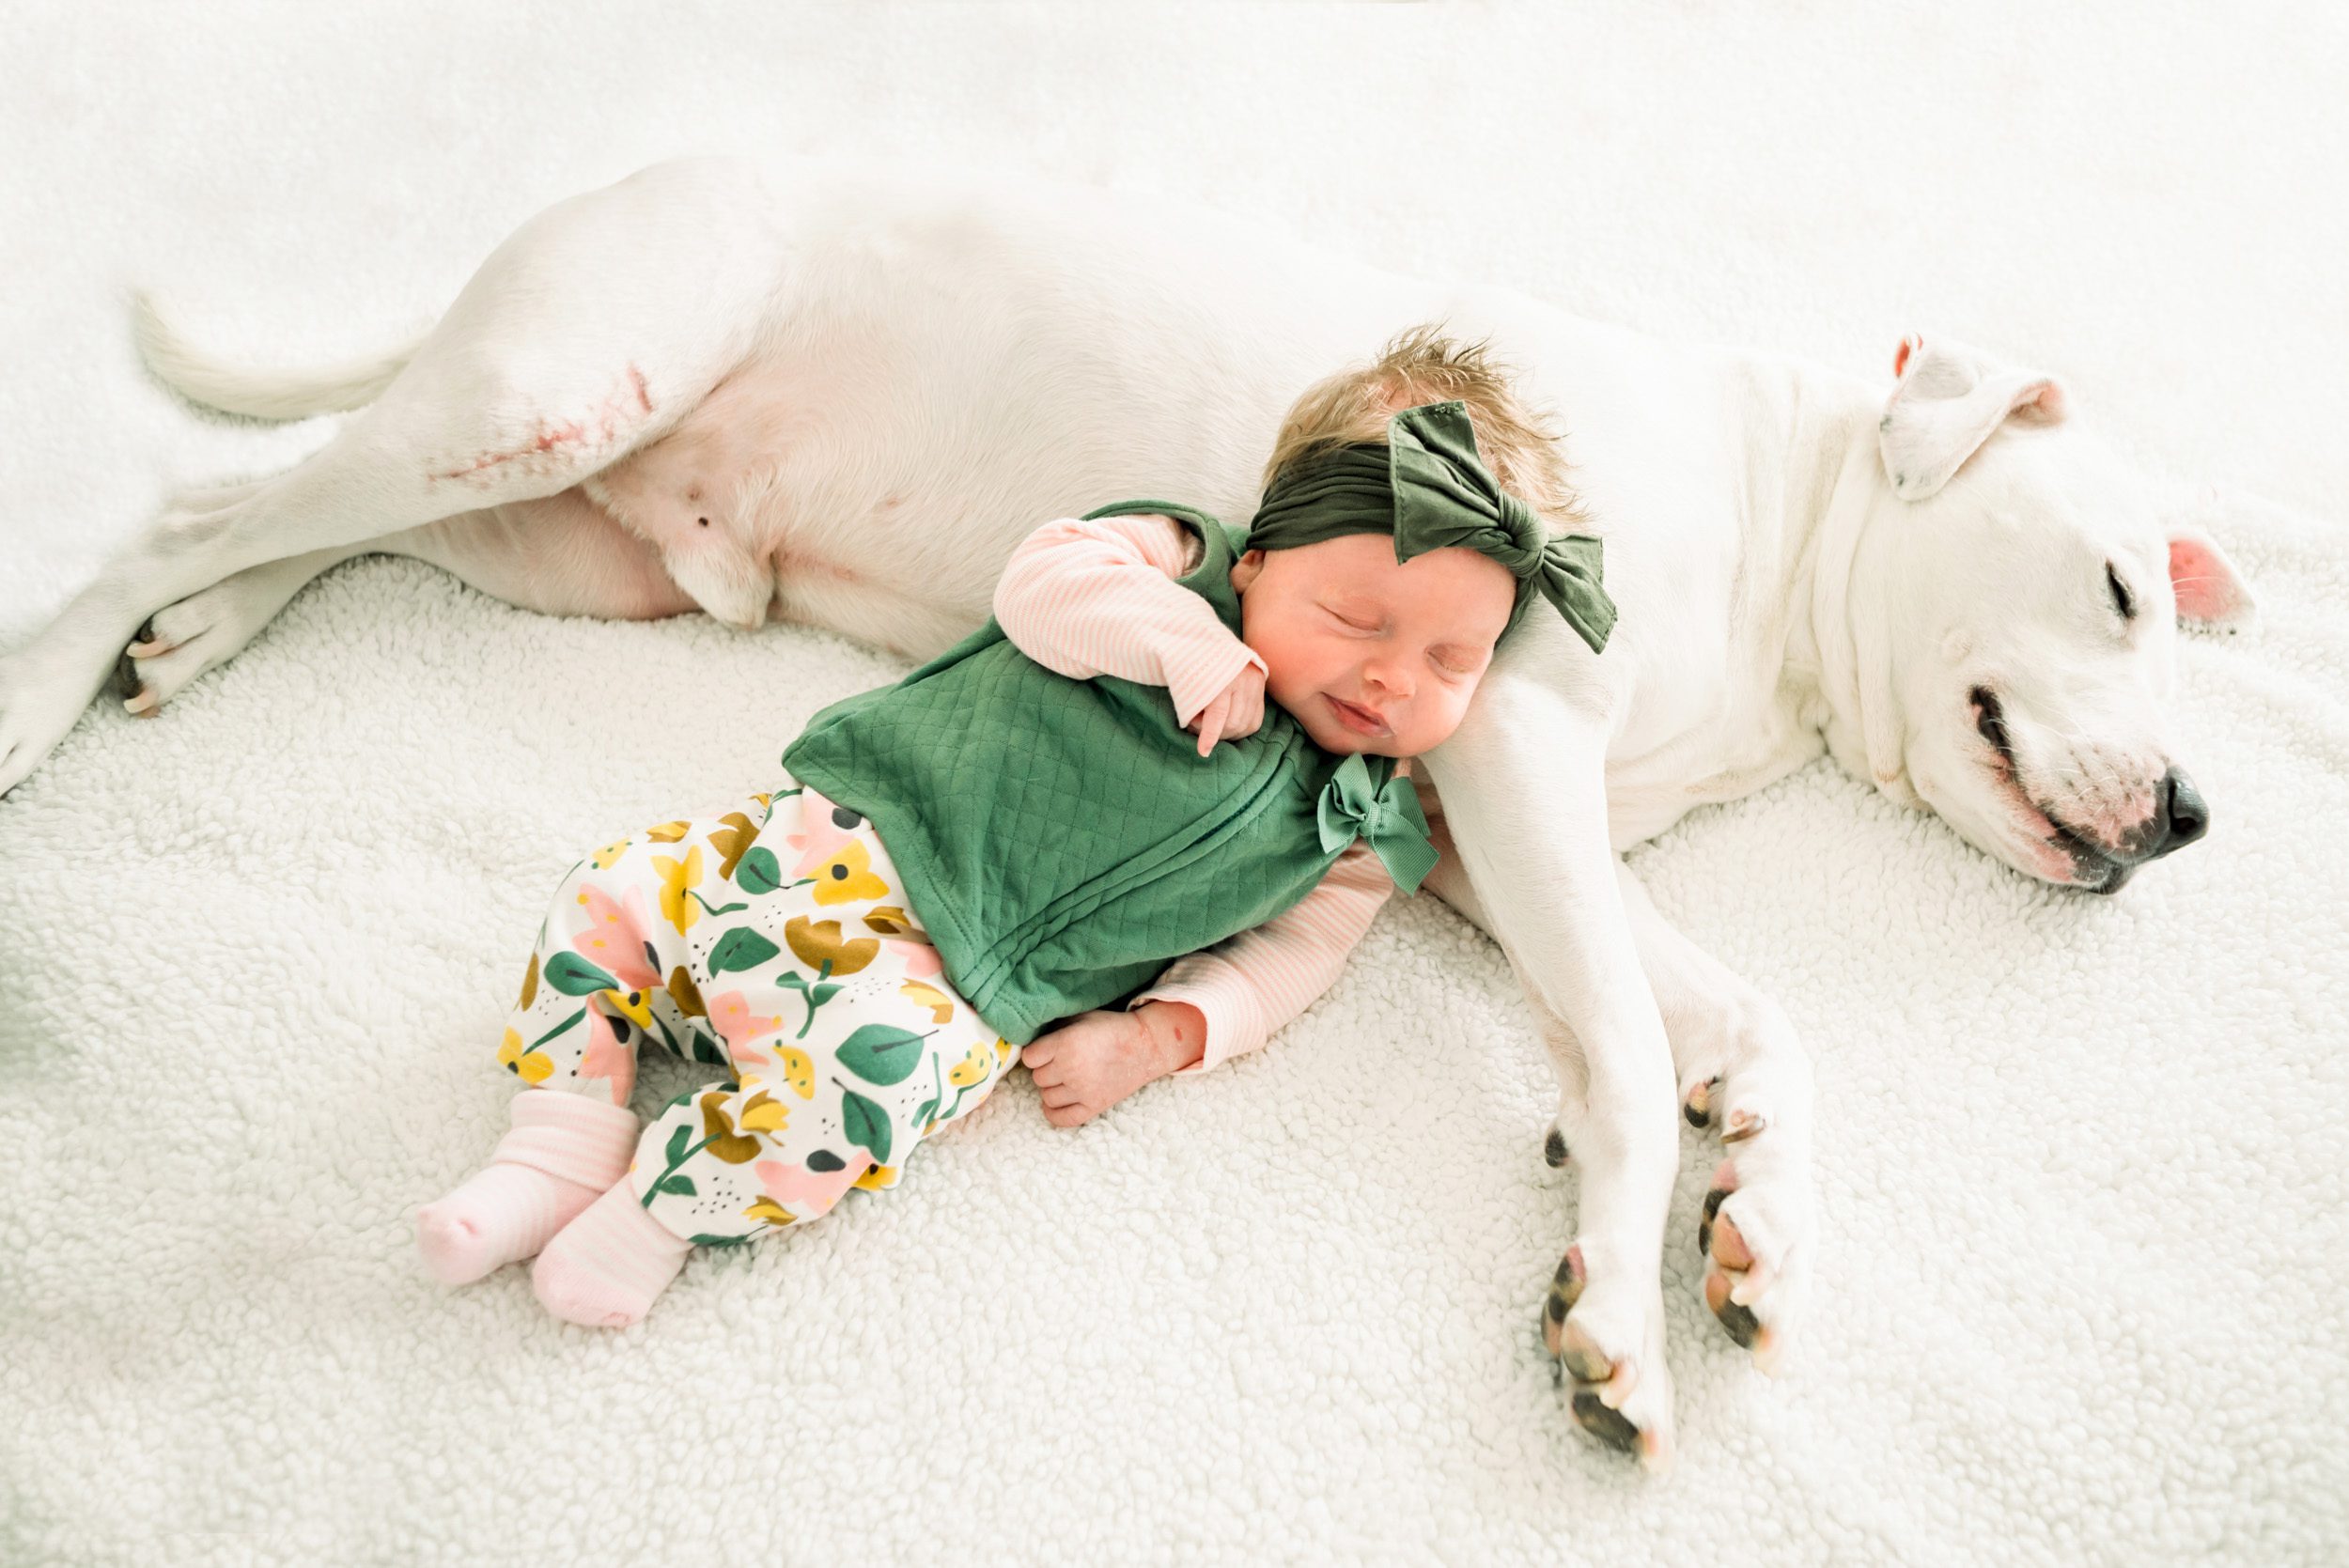 newborn baby girl and her pet dog sleeping together on a white blanket during a home newborn photoshoot